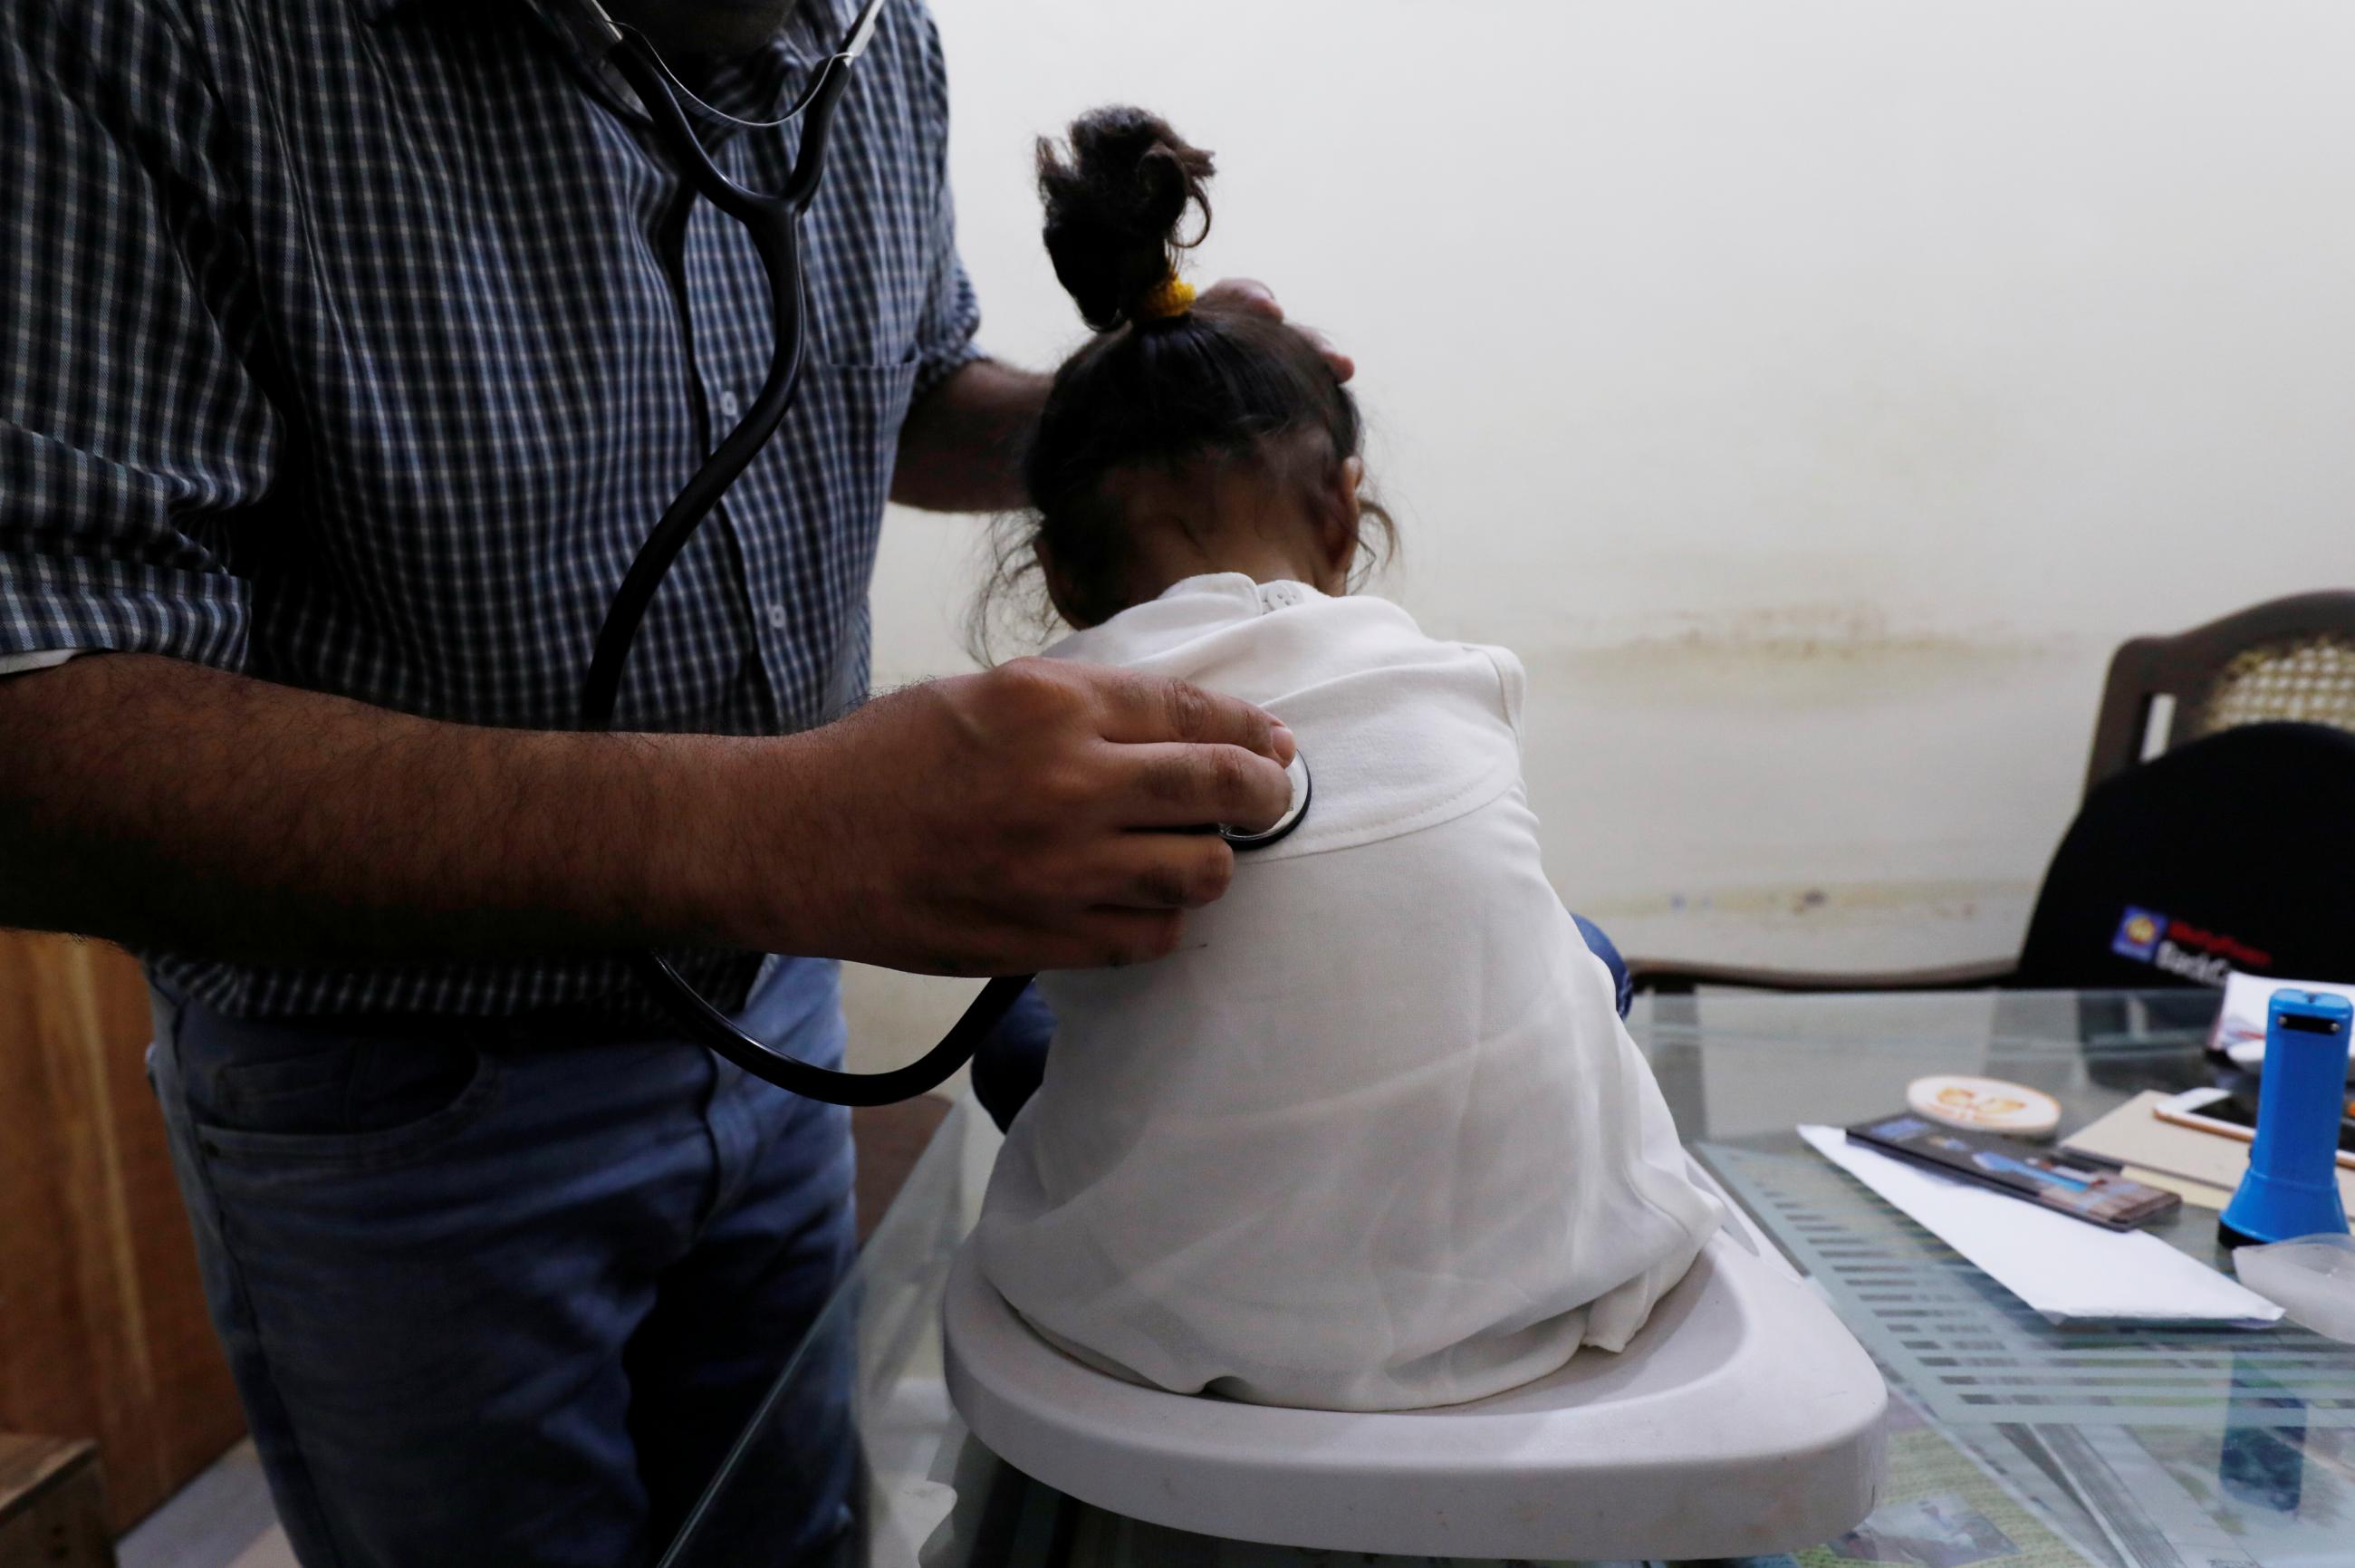 A two-year-old HIV-positive girl, who is under treatment, goes through a routine medical check-up at a clinic in Ratodero, Pakistan, on May 24, 2019.